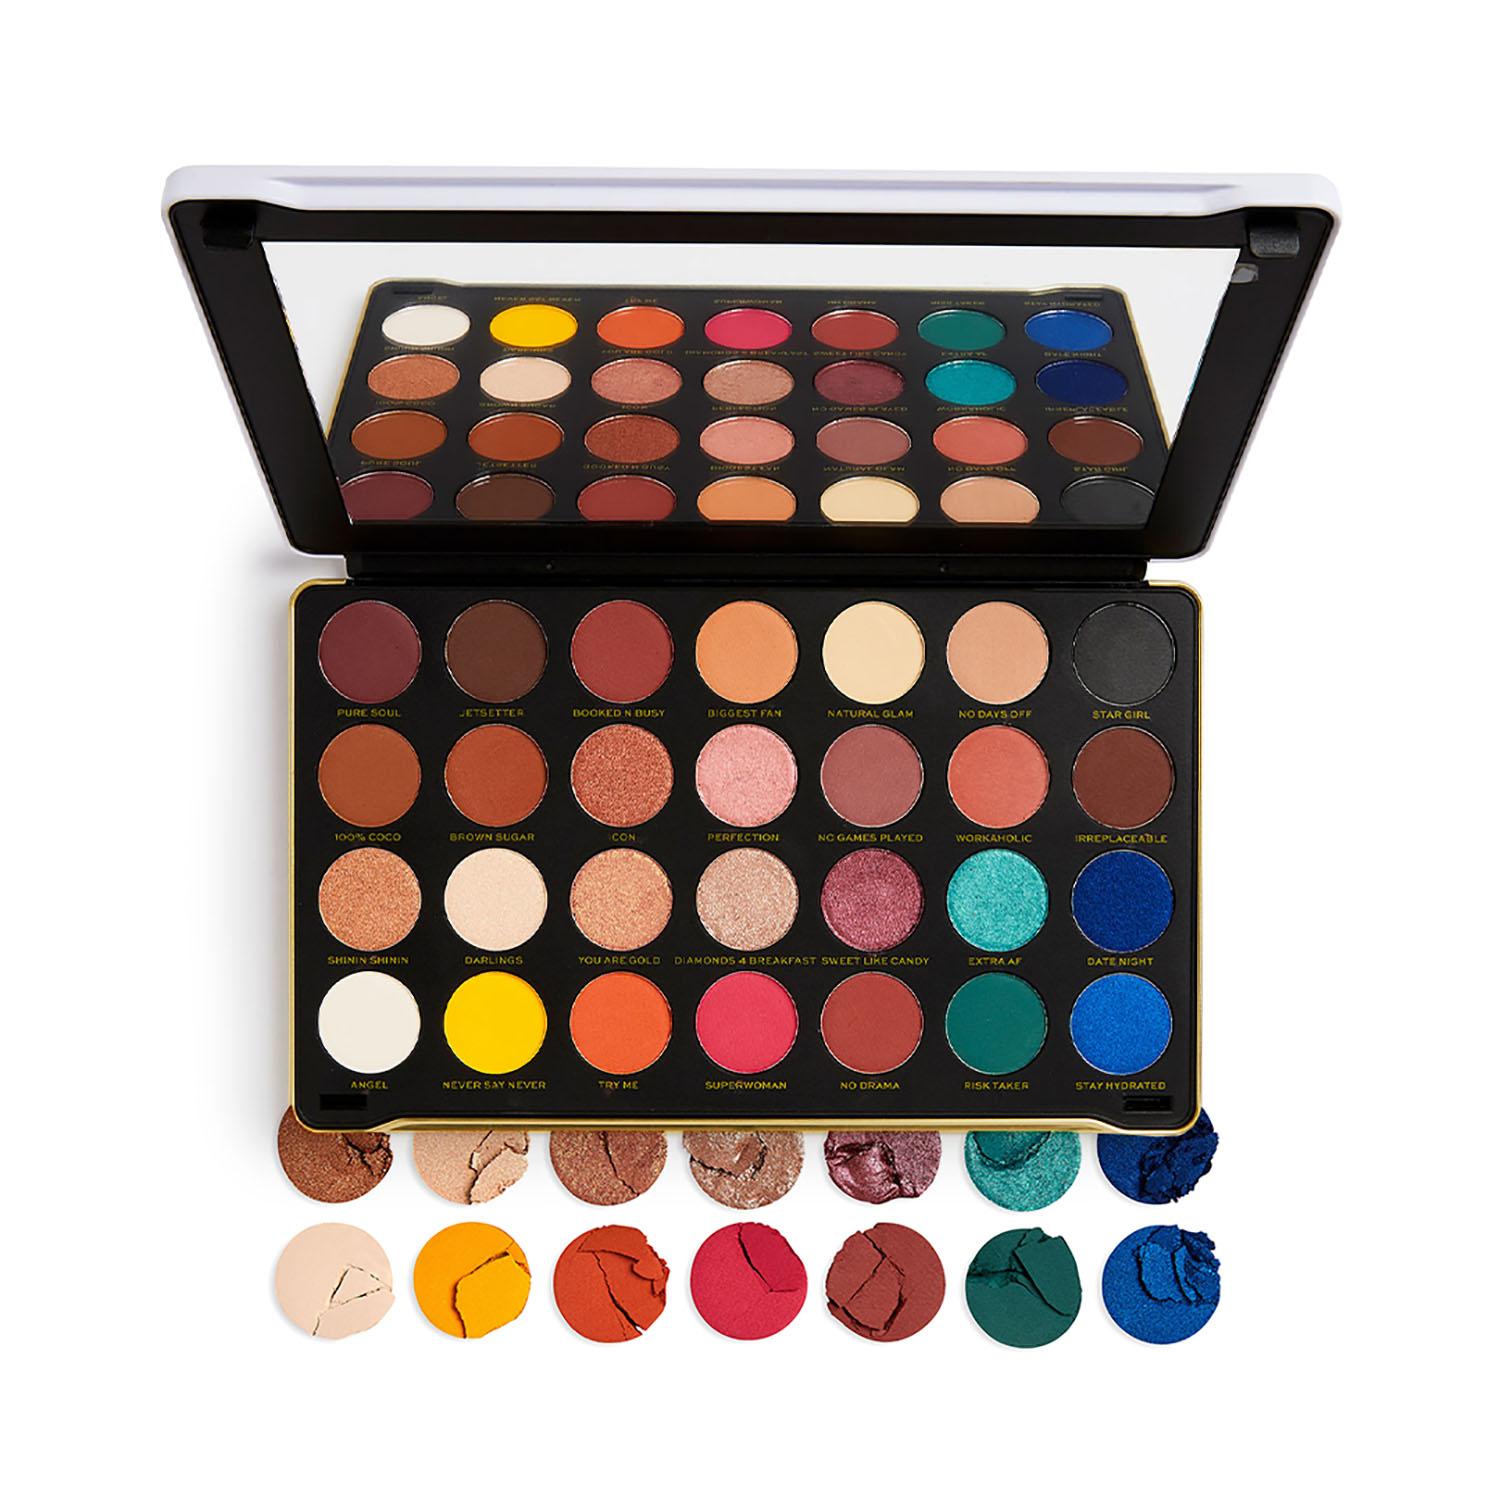 Makeup Revolution | Makeup Revolution X Patricia Bright Rich In Life Eyeshadow Palette - Multi-Colour (33.6g)